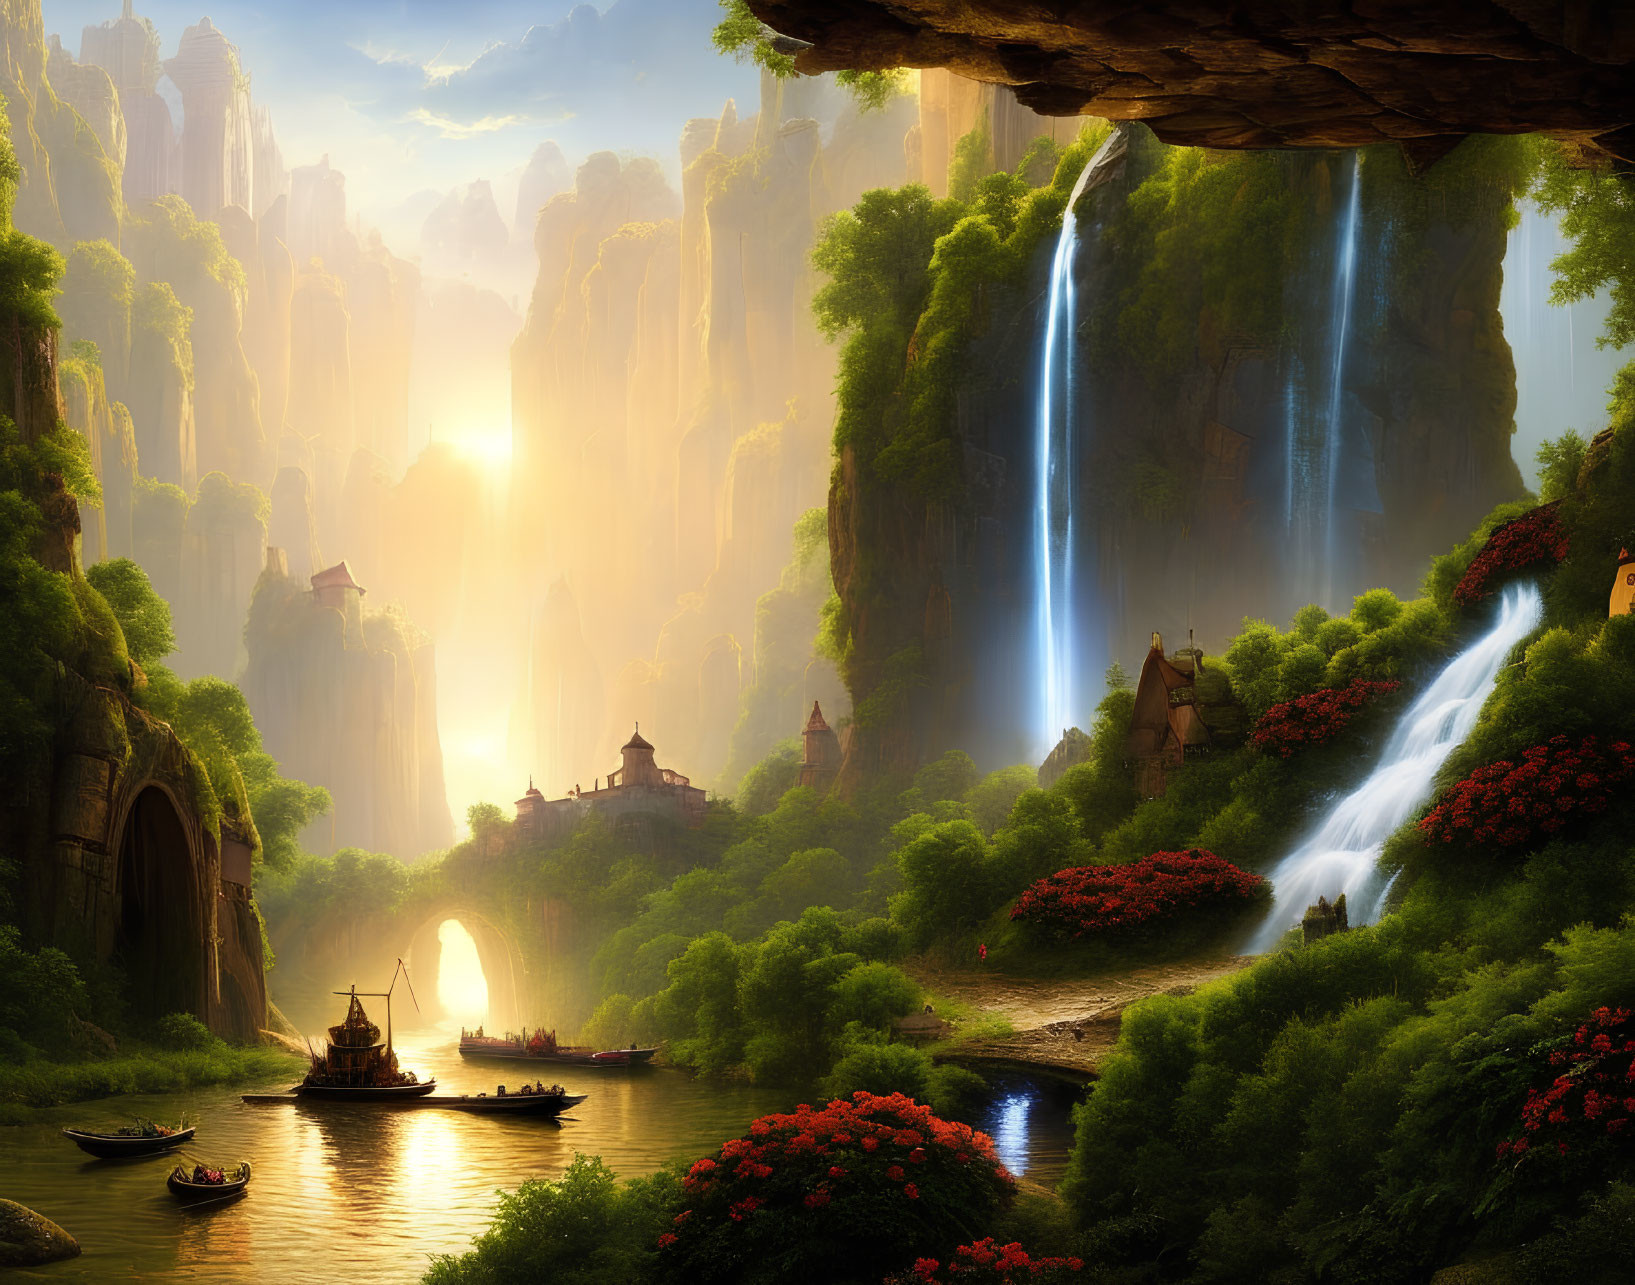 Serene valley sunrise with waterfalls, traditional buildings, boats, and lush greenery